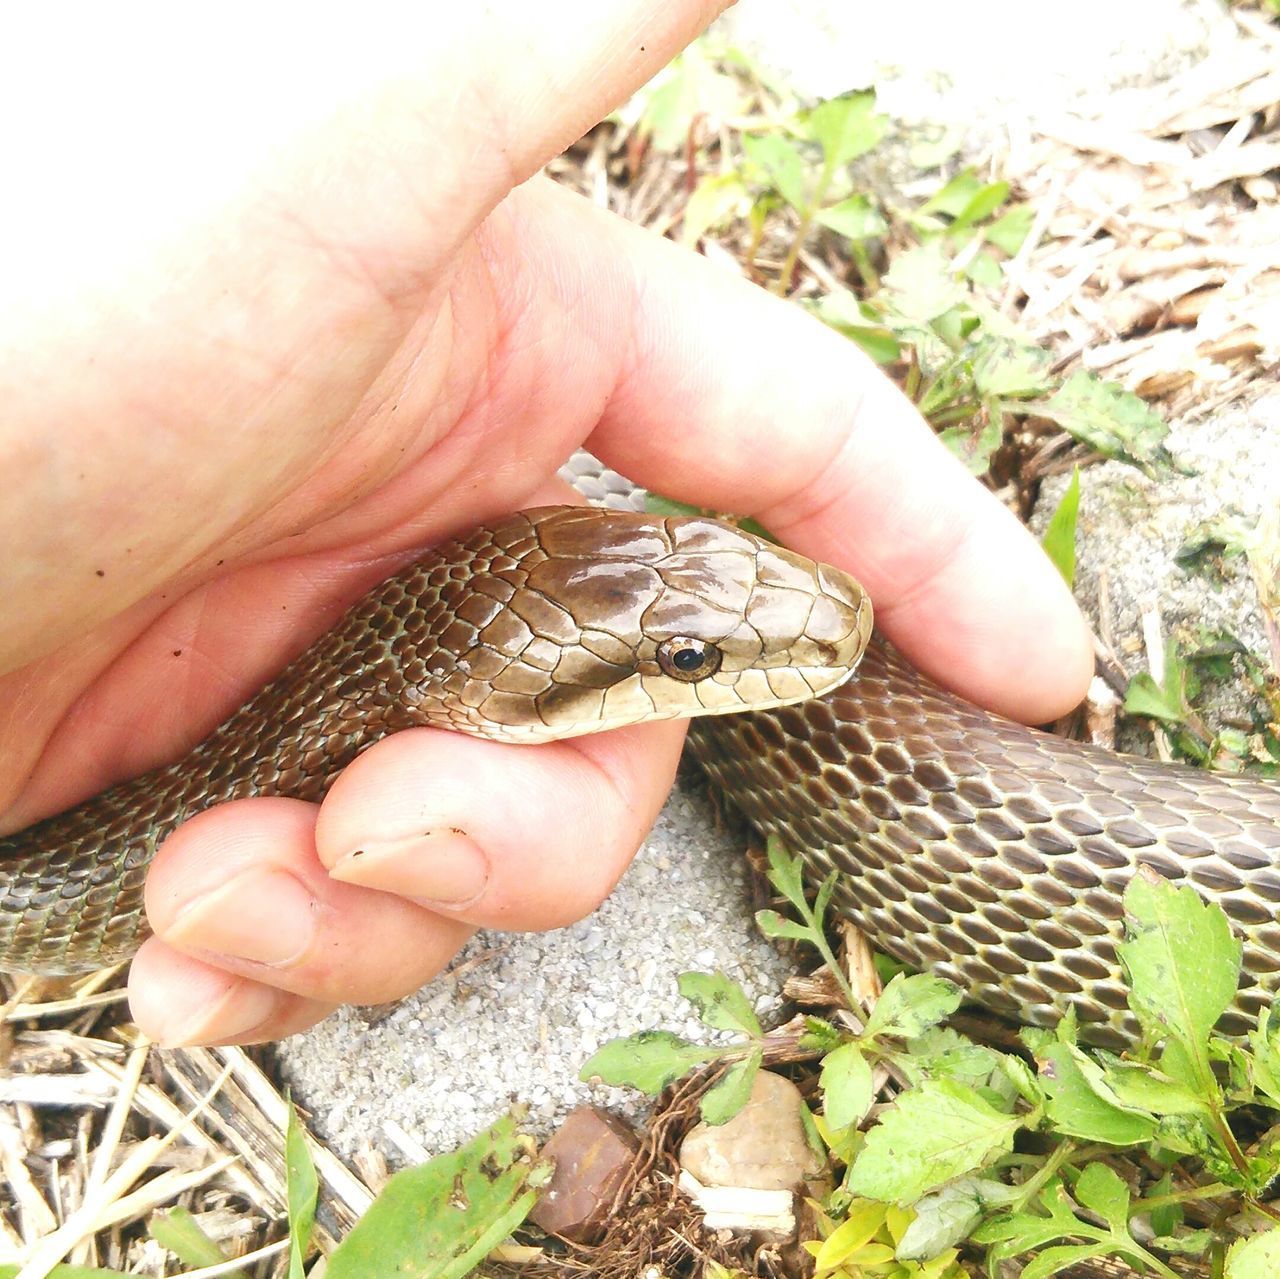 HIGH ANGLE VIEW OF A HAND HOLDING A LIZARD